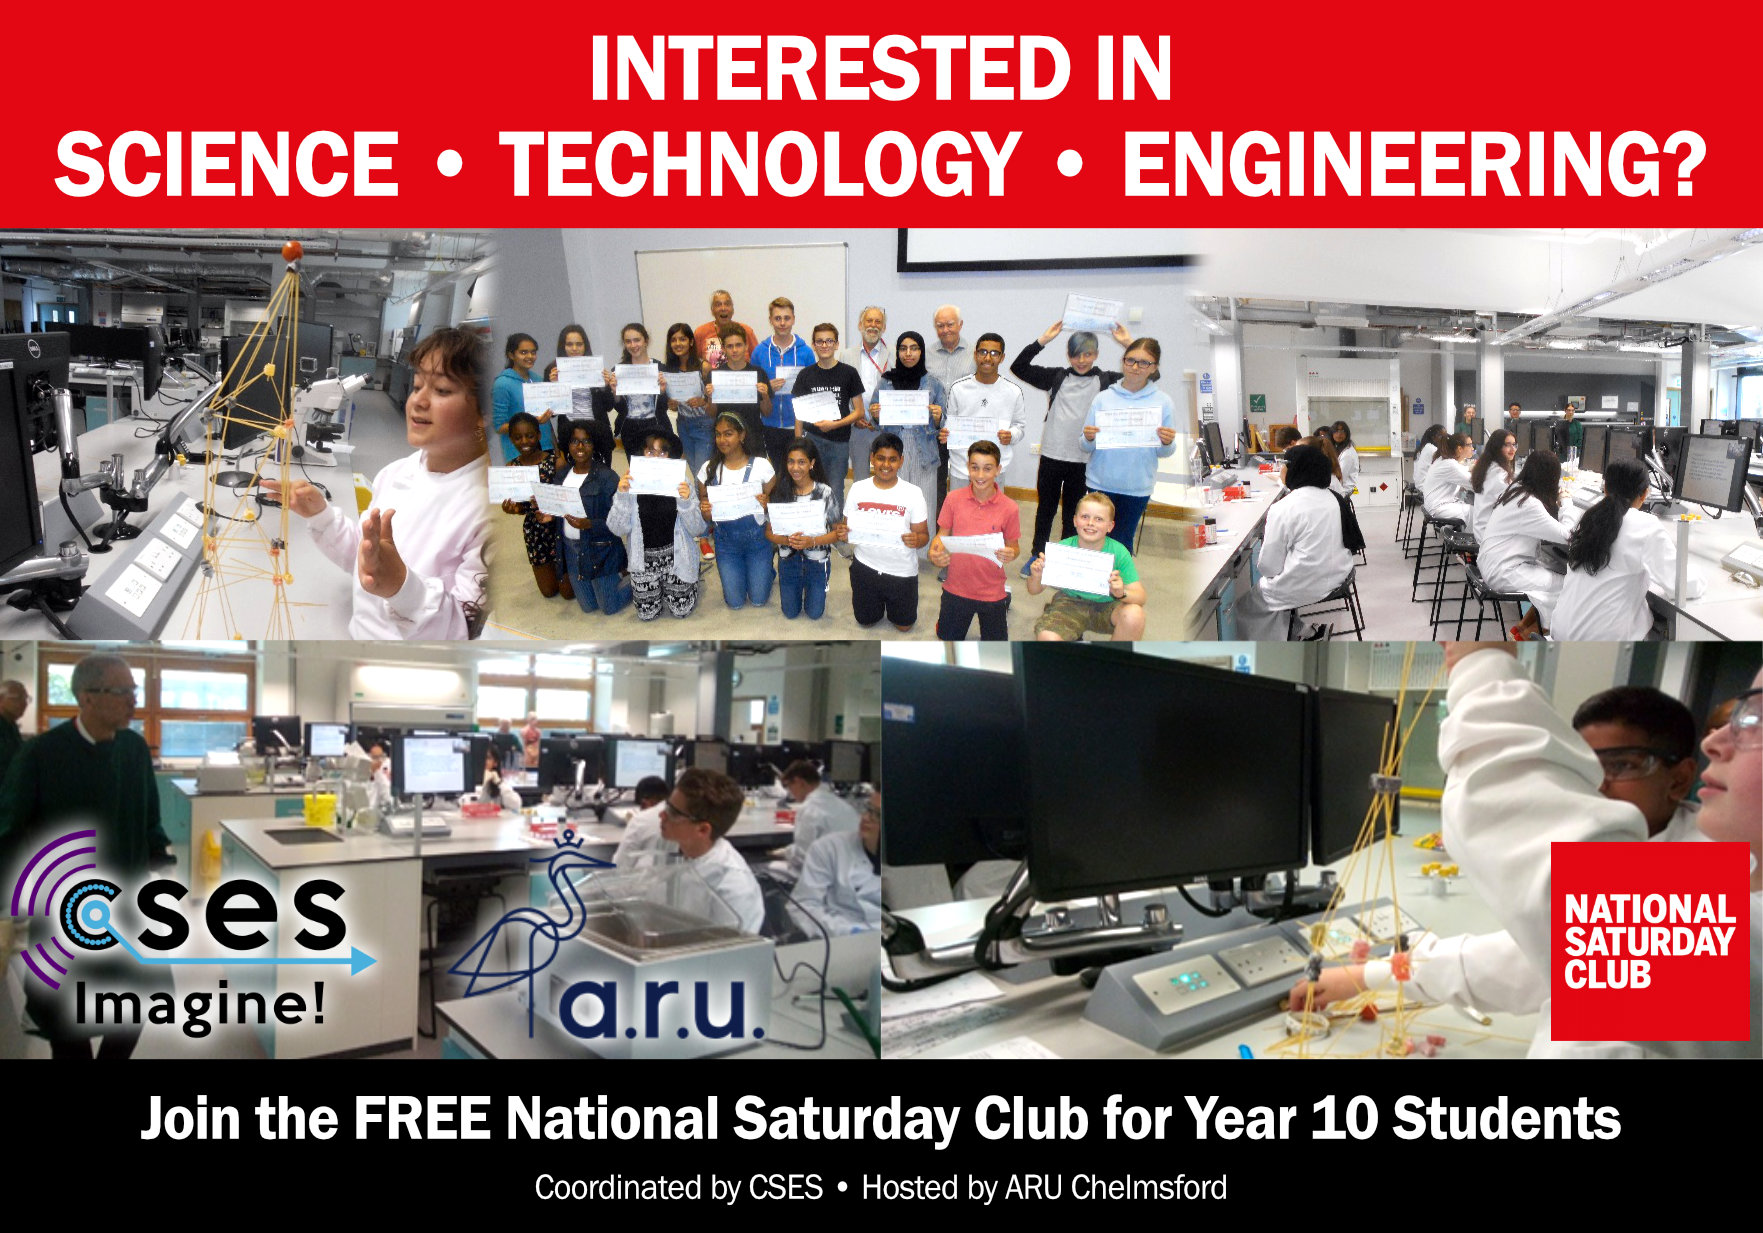 National Saturday Club: Imagine! Science and Engineering